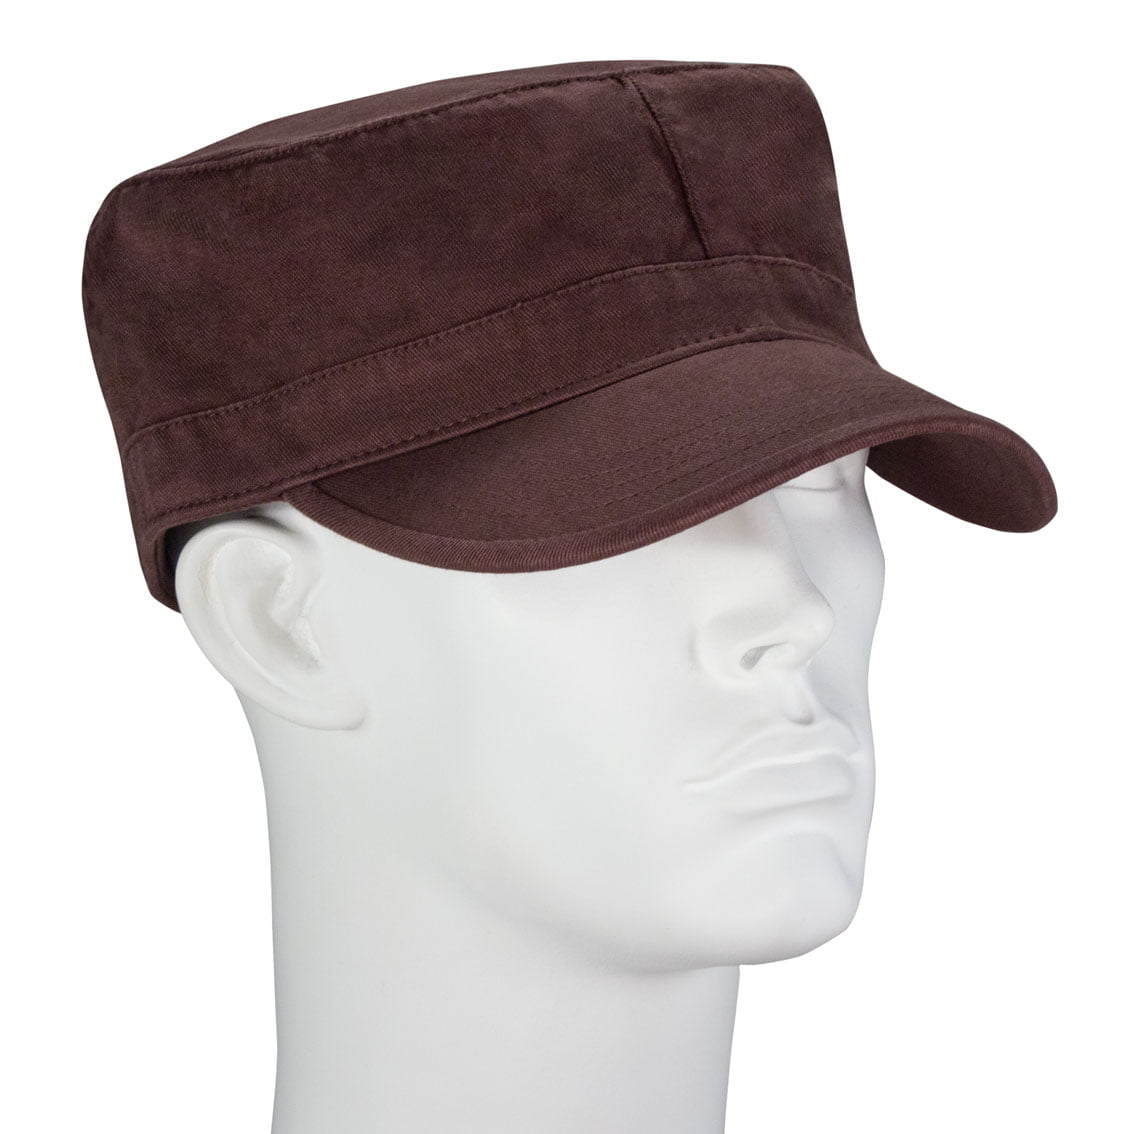 12pcs Brown Plain Castro Military Fatigue Army Hats - Fitted - Unconstructed - 100% Cotton - Bulk by the Dozen - Wholesale